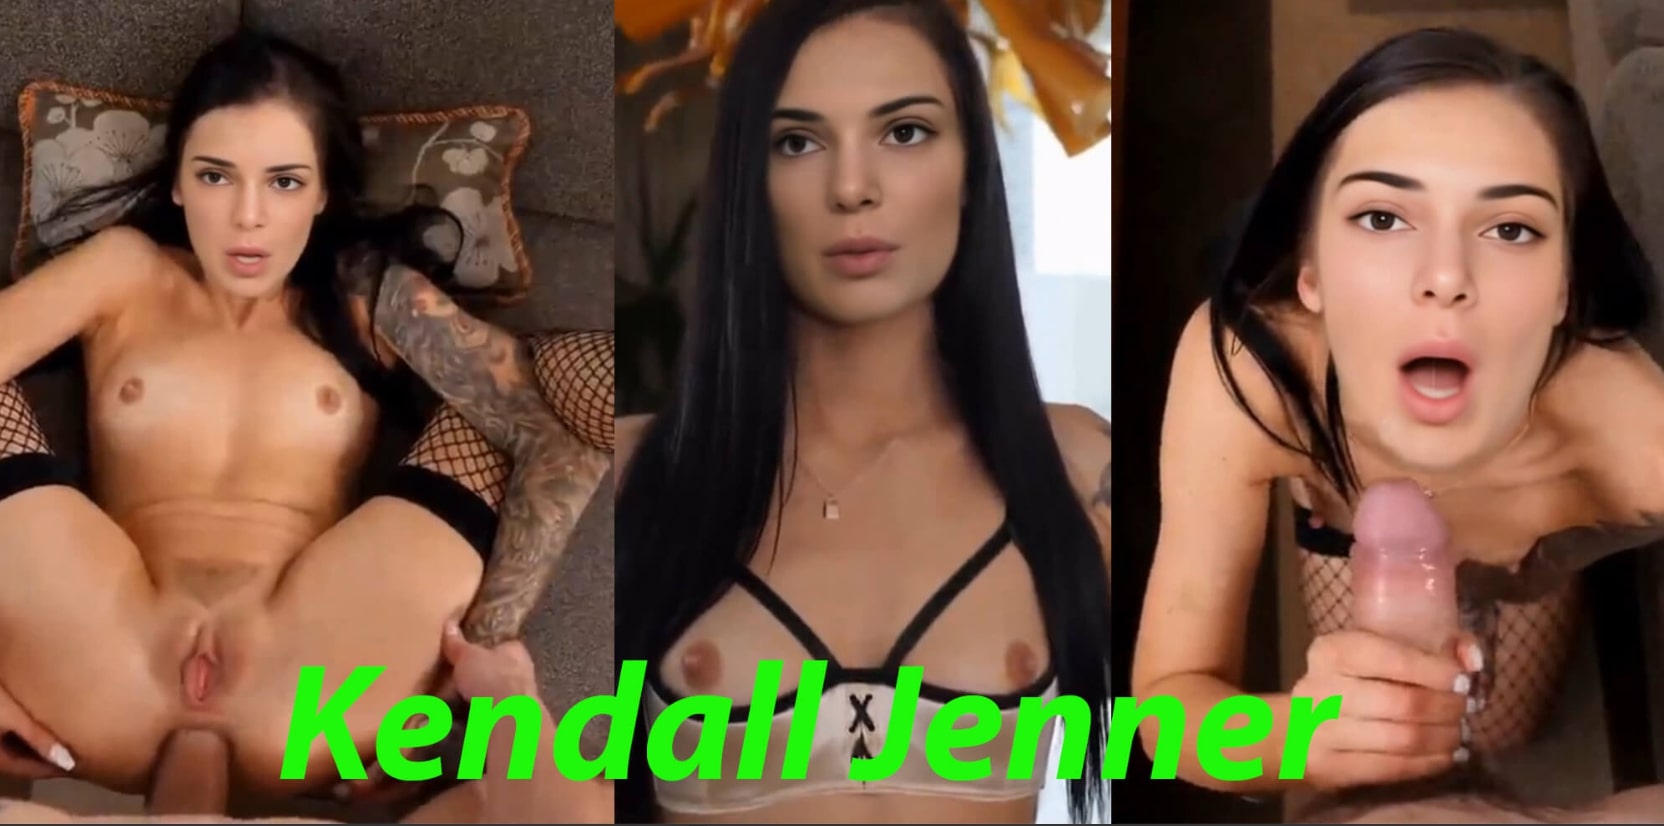 Kendall Jenner gets fucked in the ass (full version)